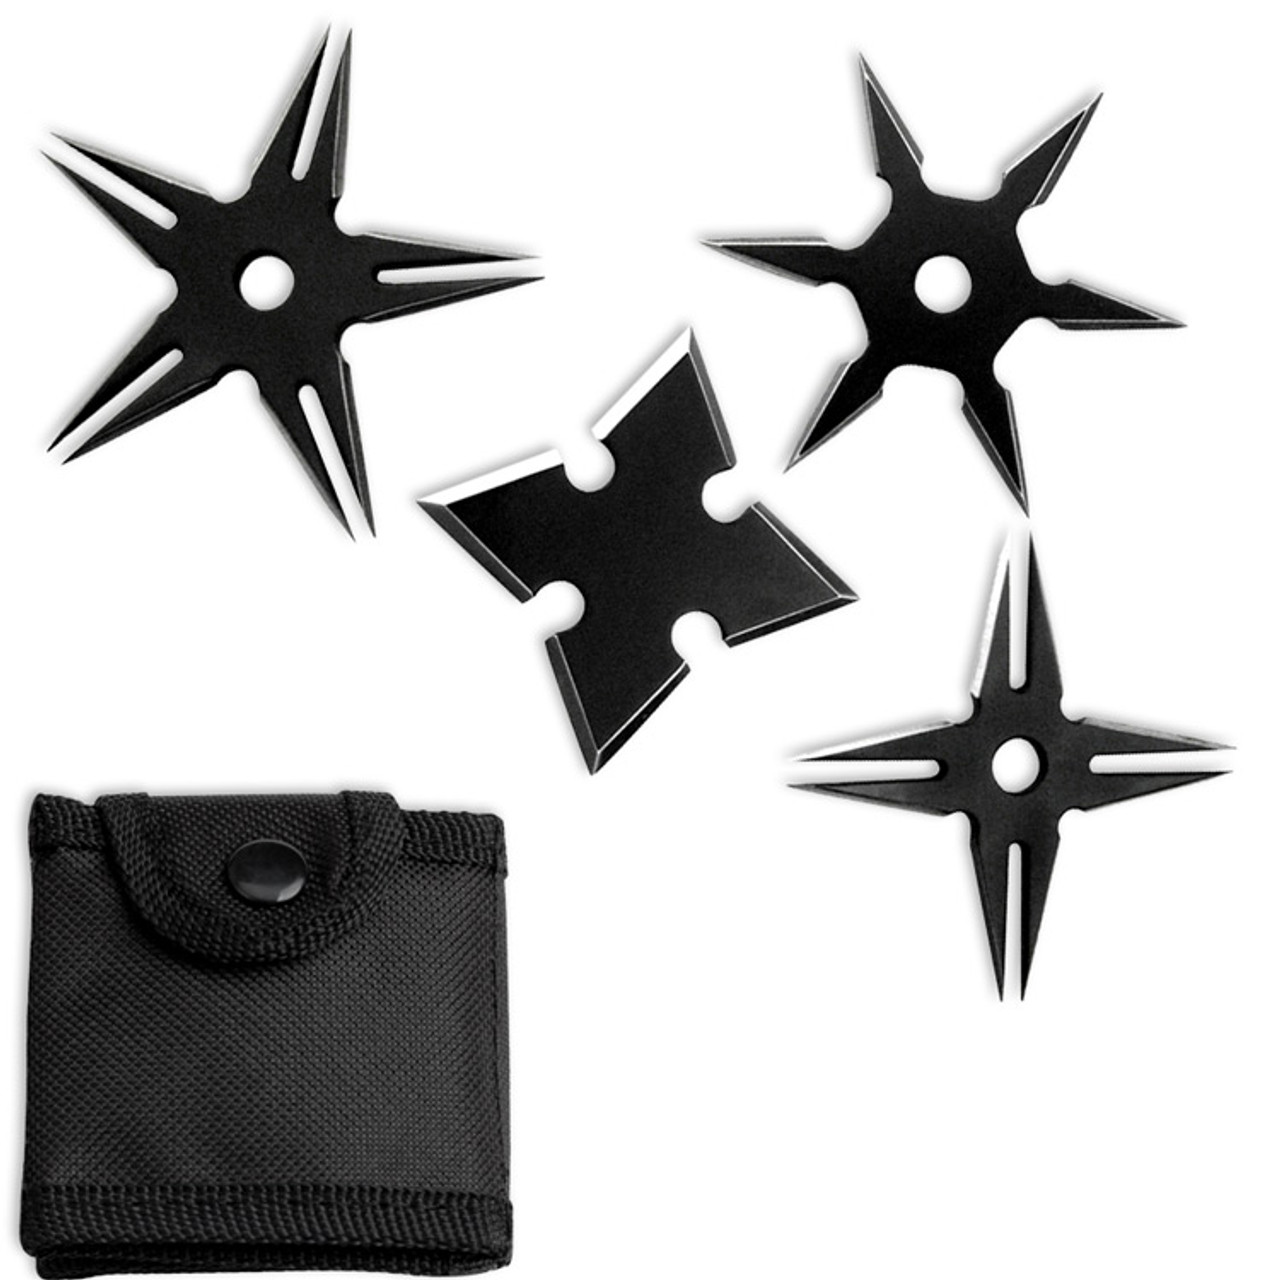 Ninja throwing stars confiscated at BWI-Marshall by TSA agents